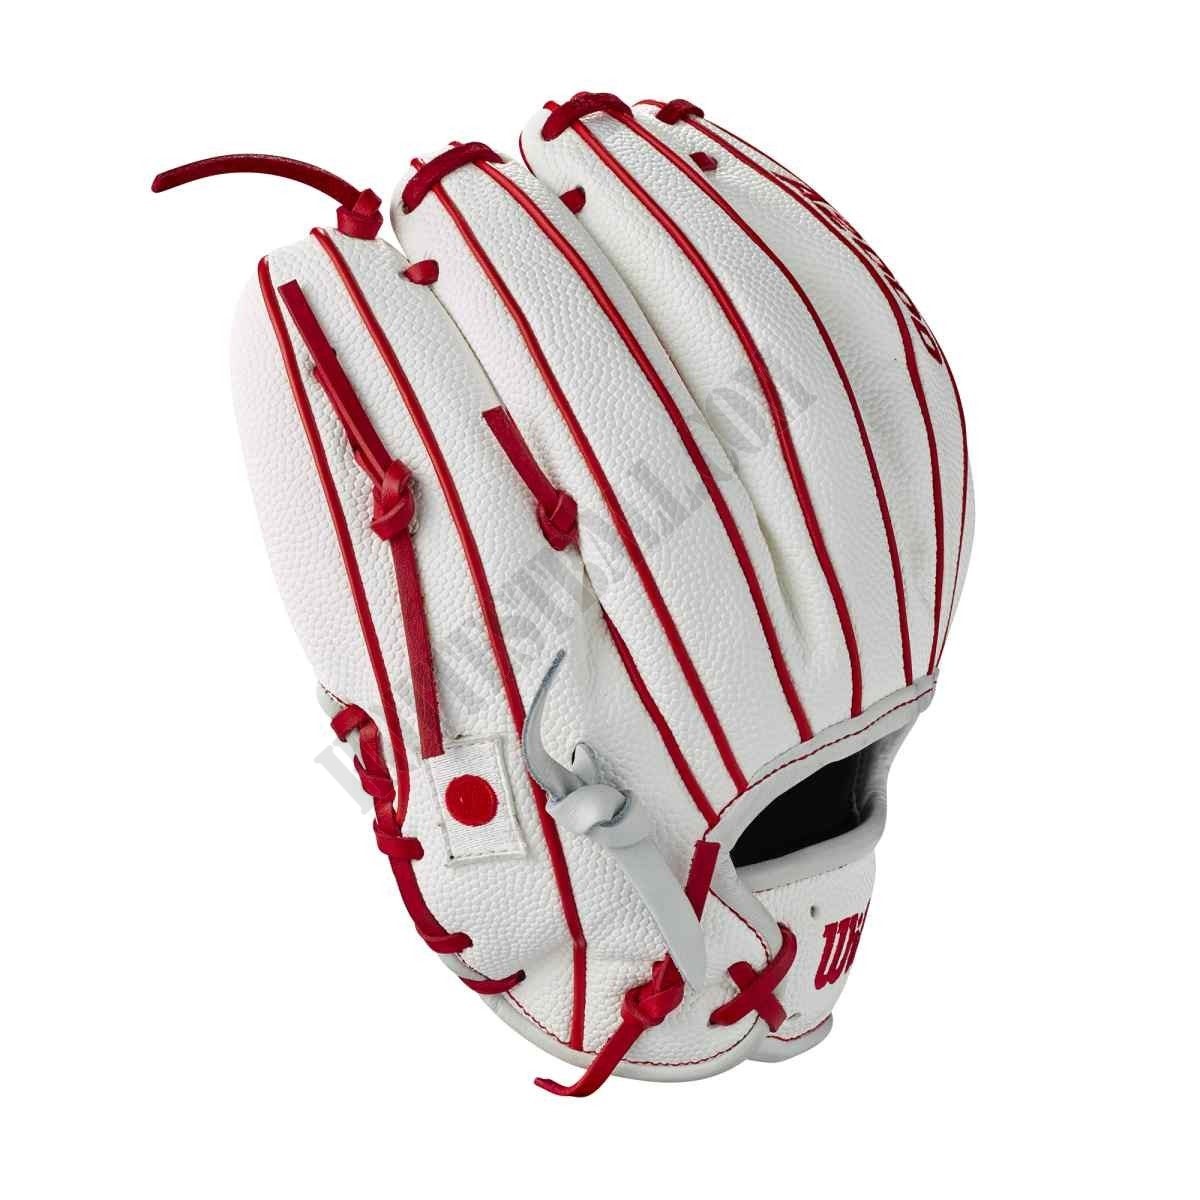 2021 A2000 1786SS Japan 11.5" Infield Baseball Glove - Limited Edition ● Wilson Promotions - -4